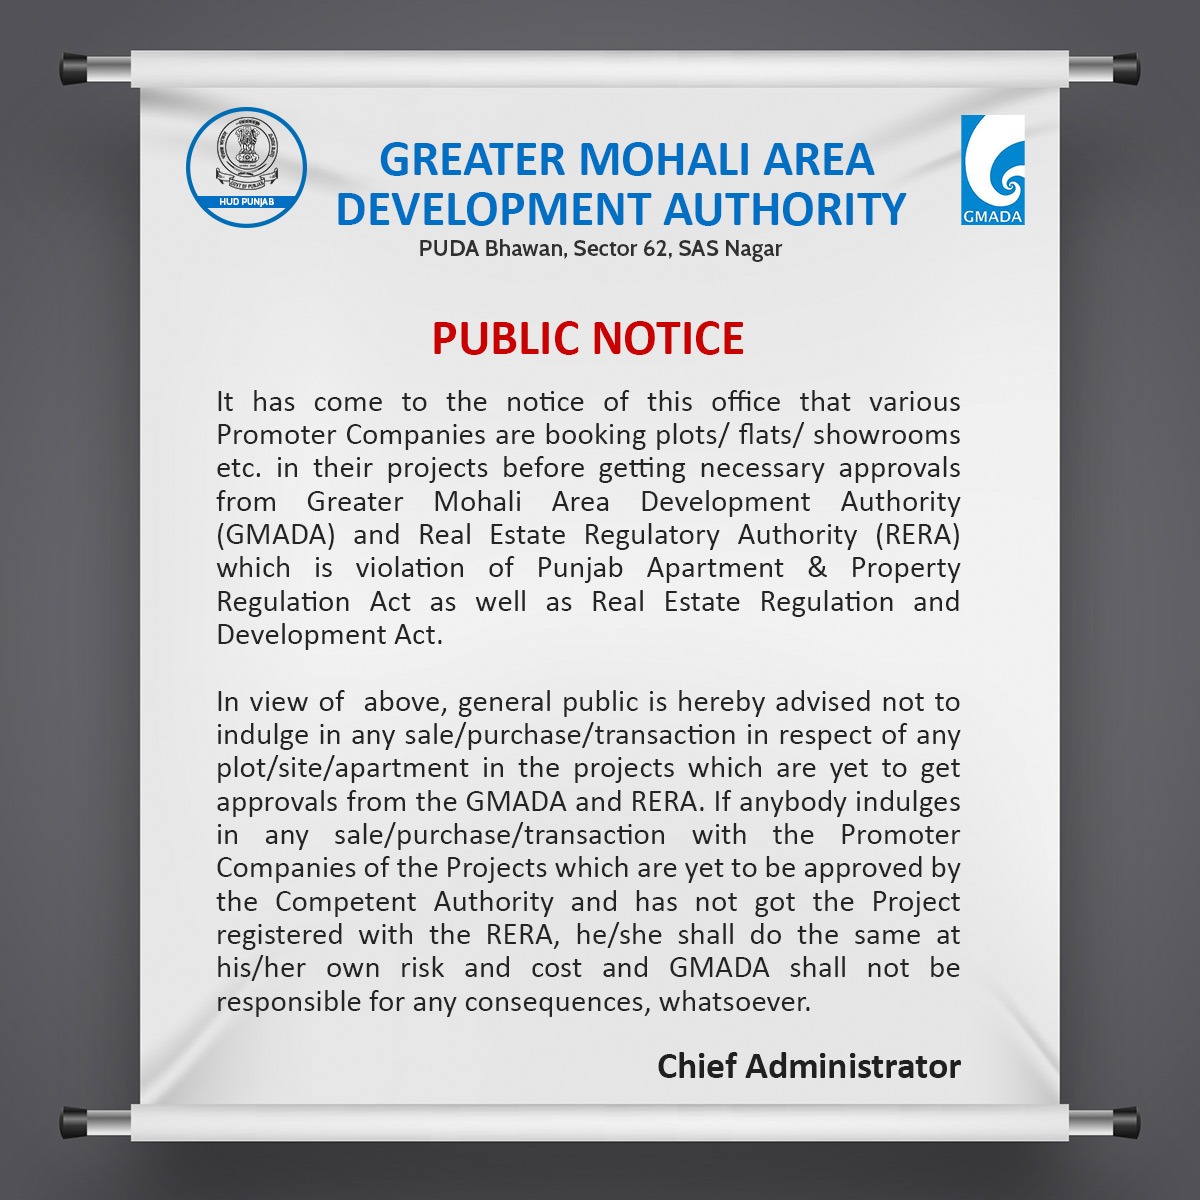 GMADA cautions general public against buying property in unapproved projects.
 
 #GMADAAlert #RERAUpdate #RealEstateNotice #PropertyRegulation #ApprovalAlert #PublicAdvisory #LegalGuidelines #PropertyTransactions #BuyersBeware #RealEstateCaution #ProjectApprovals